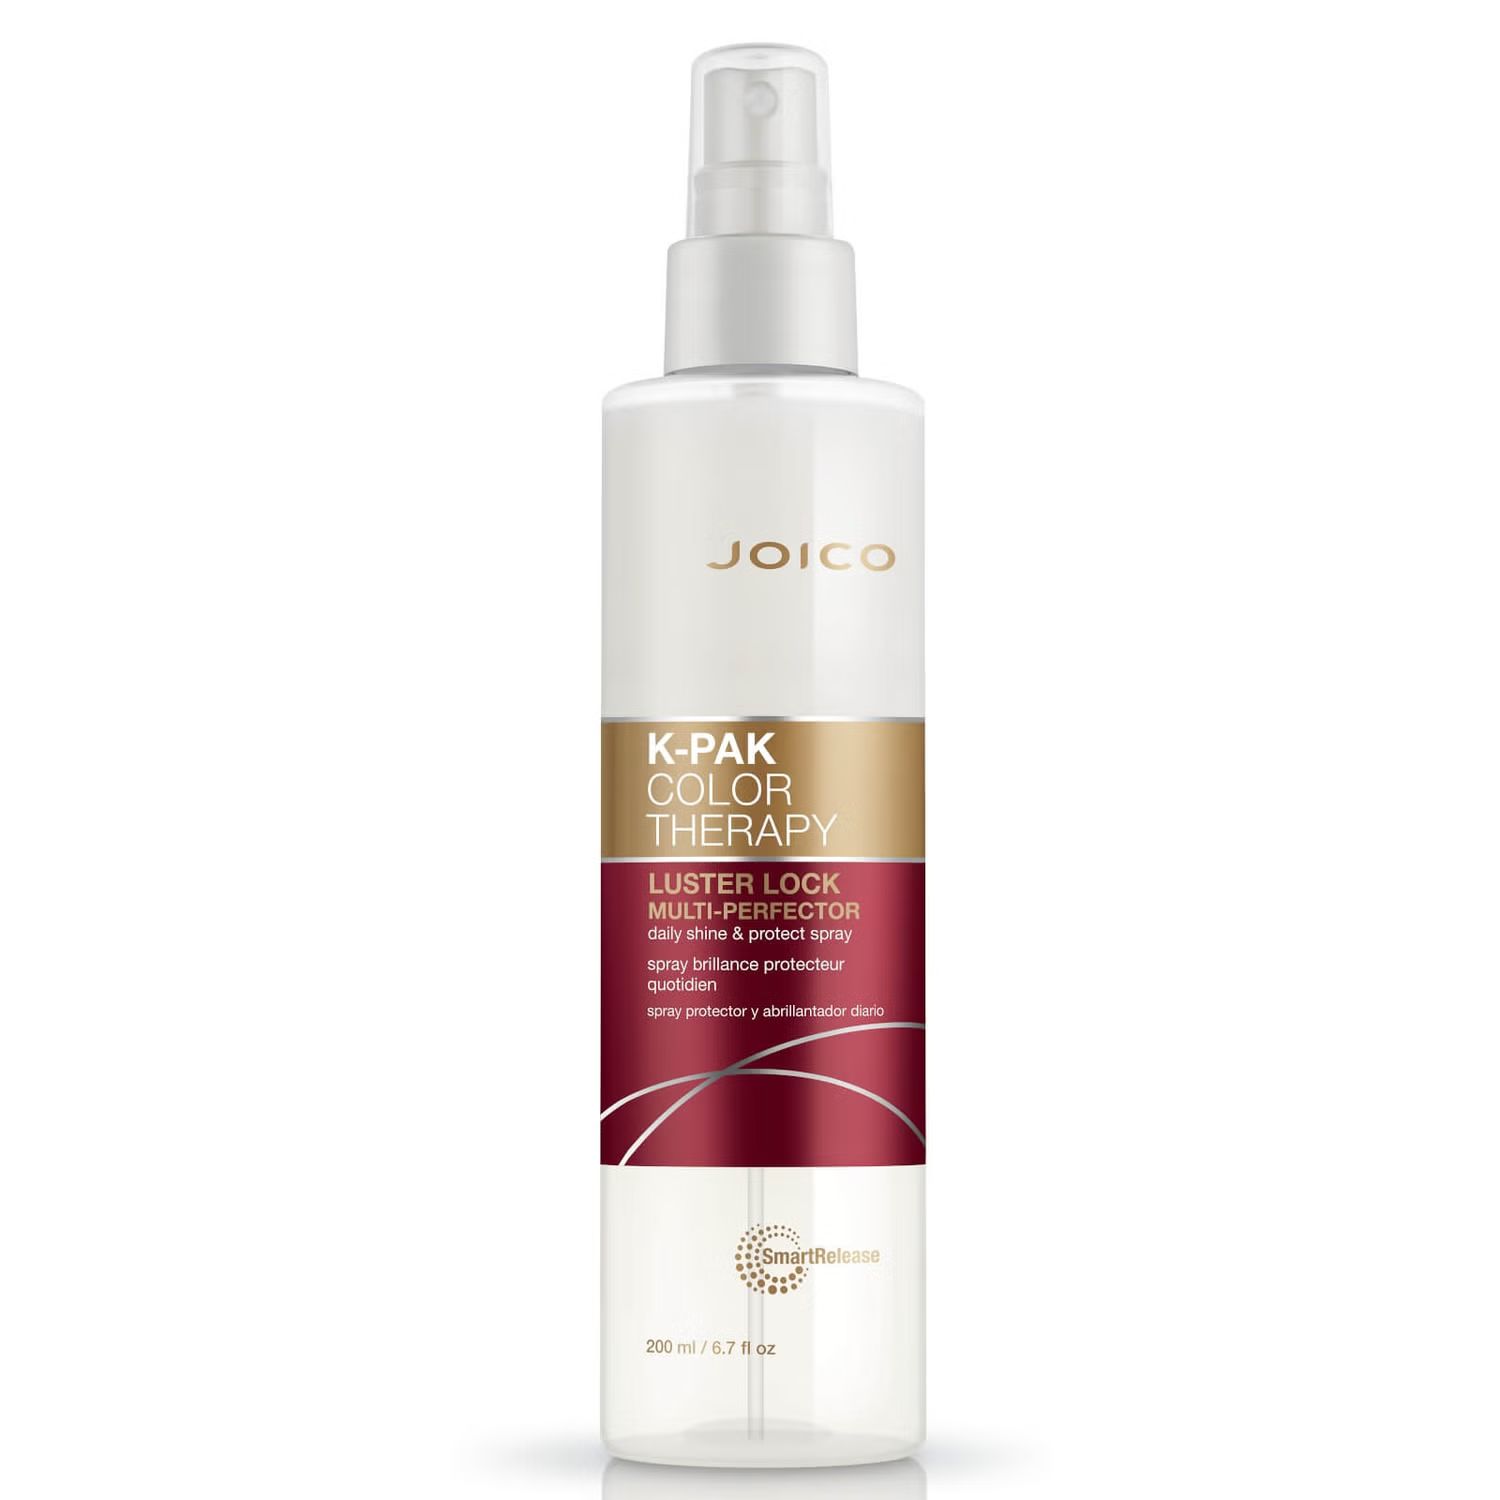 Joico K-Pak Color Therapy Luster Lock Multi-Perfector Daily Shine and Protect Spray 200ml | Look Fantastic (ROW)